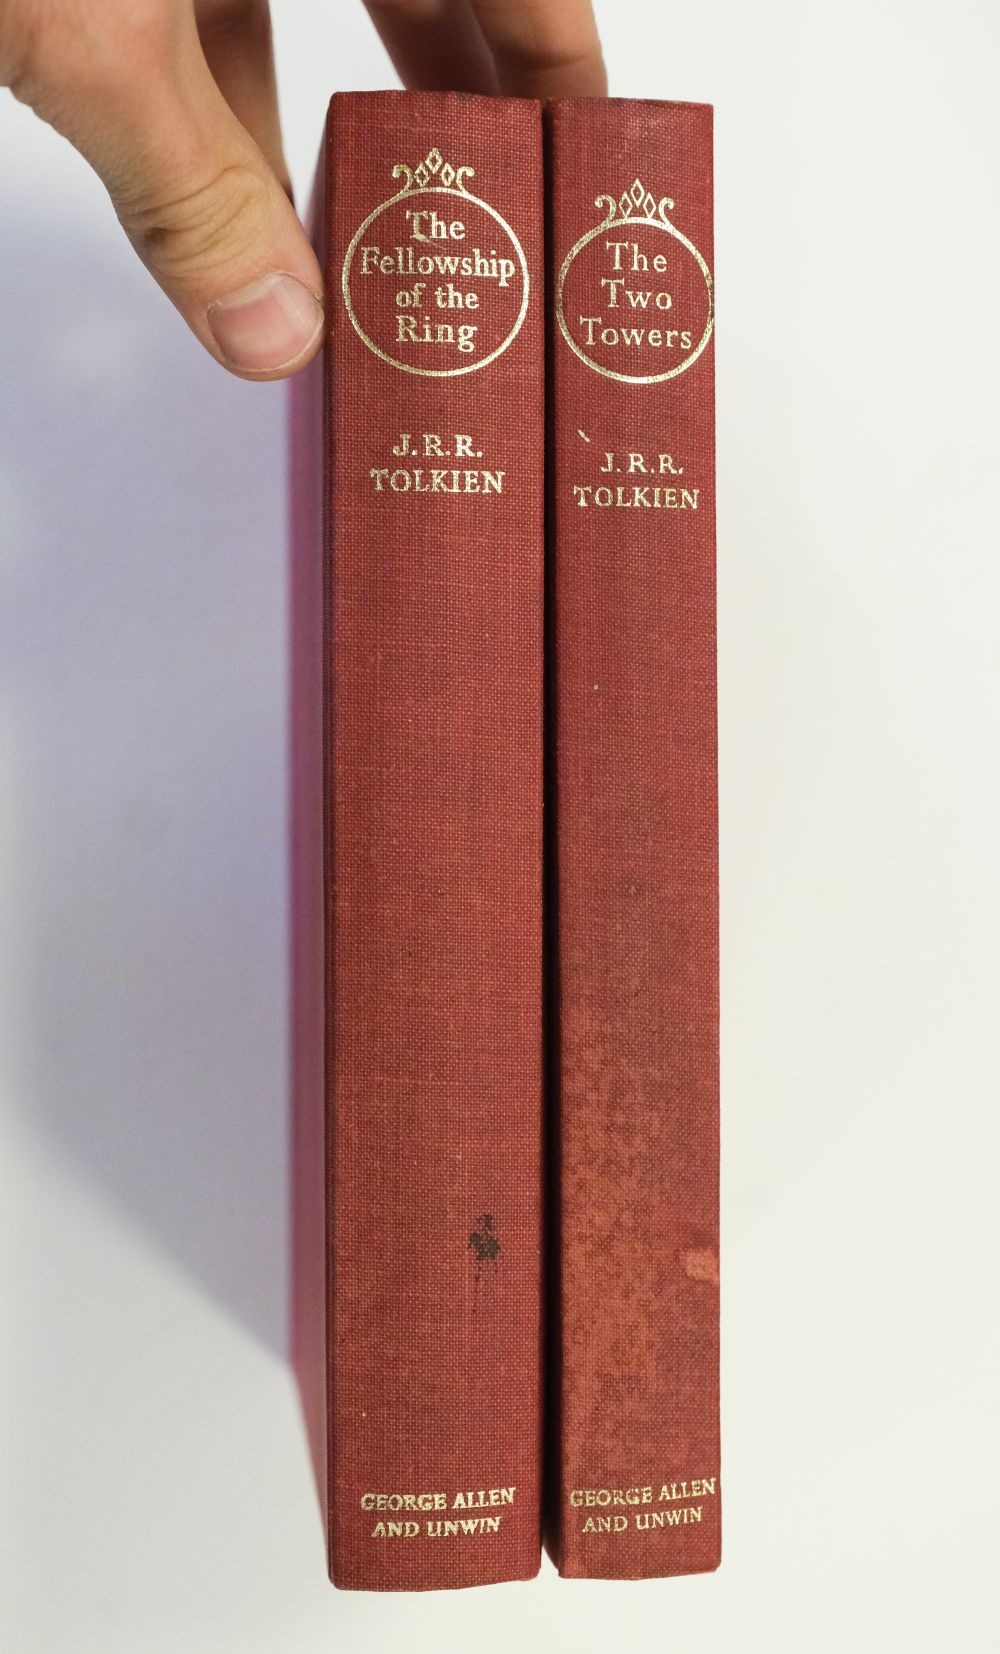 Tolkien (J.R.R.) Lord of the rings 3 volumes mixed impressions 500-800 - Image 4 of 27